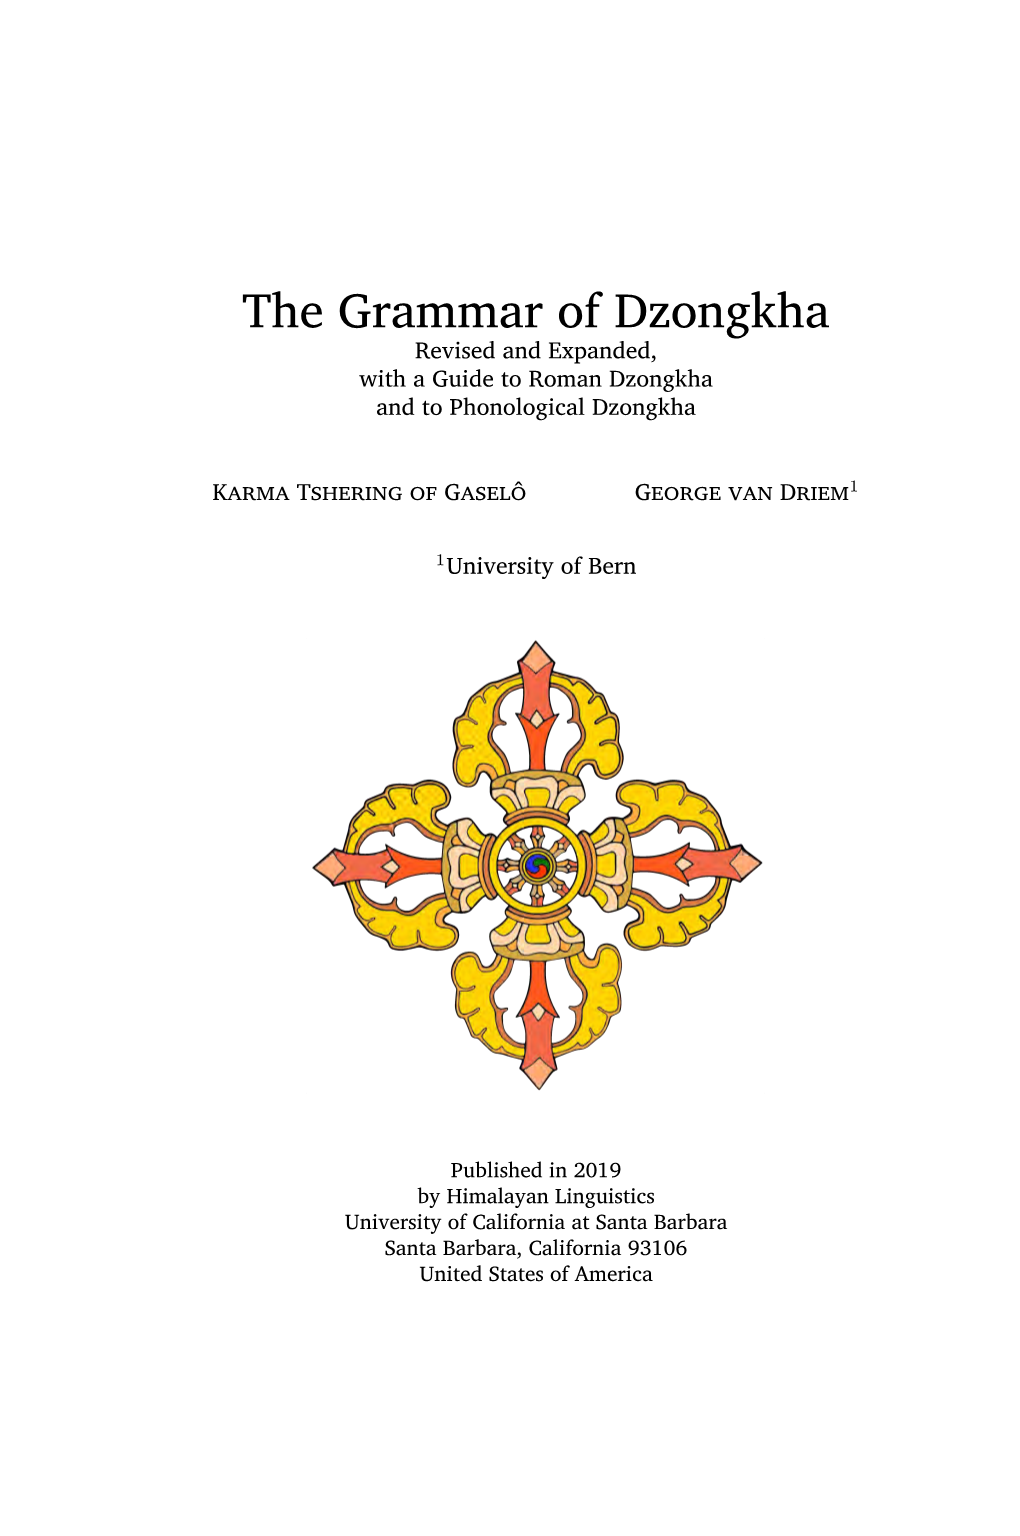 The Grammar of Dzongkha Revised and Expanded, with a Guide to Roman Dzongkha and to Phonological Dzongkha